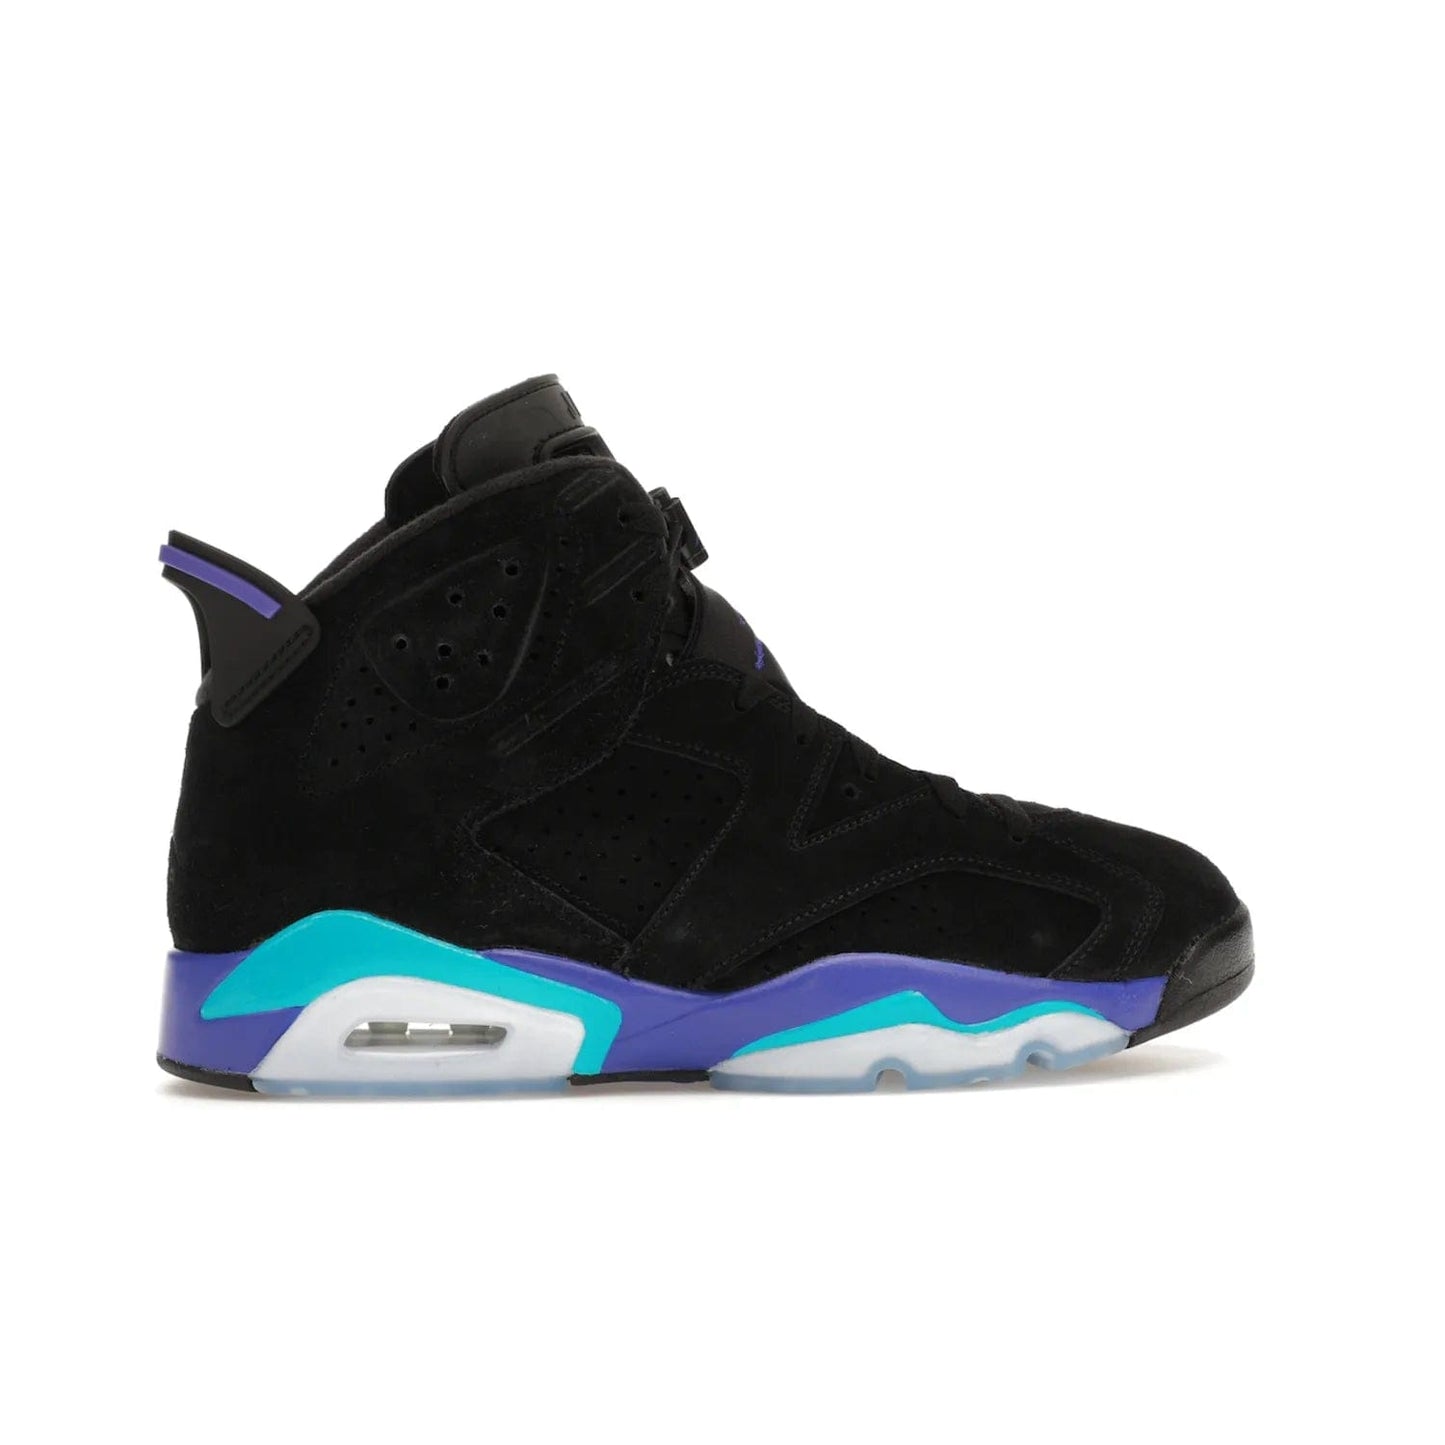 Jordan 6 Retro Aqua - Image 36 - Only at www.BallersClubKickz.com - Feel the classic Jordan 6 Retro Aqua paired with modern style. Black, Bright Concord, and Aquatone hues are crafted with a supple suede and rubberized heel tab. This standout sneaker adds signature Jordan elements at $200. Elevate your style with the Jordan 6 Retro Aqua.